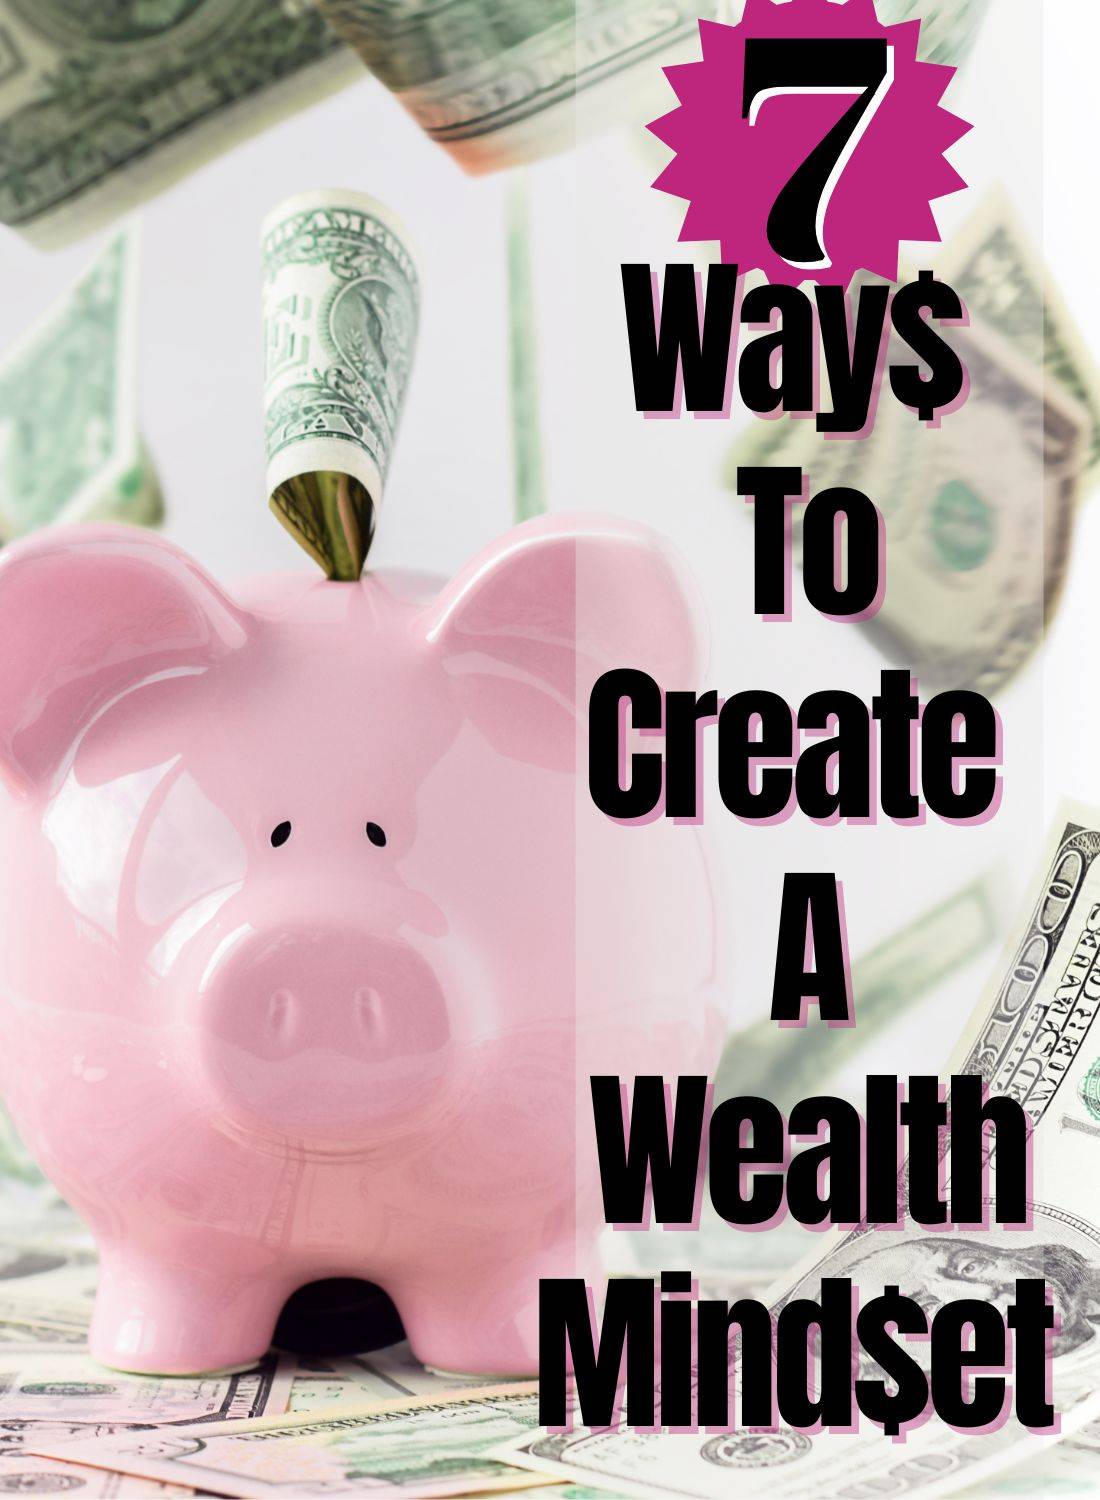 7 ways to create a wealth mindset with a pink piggy bank and dollar bills in the background